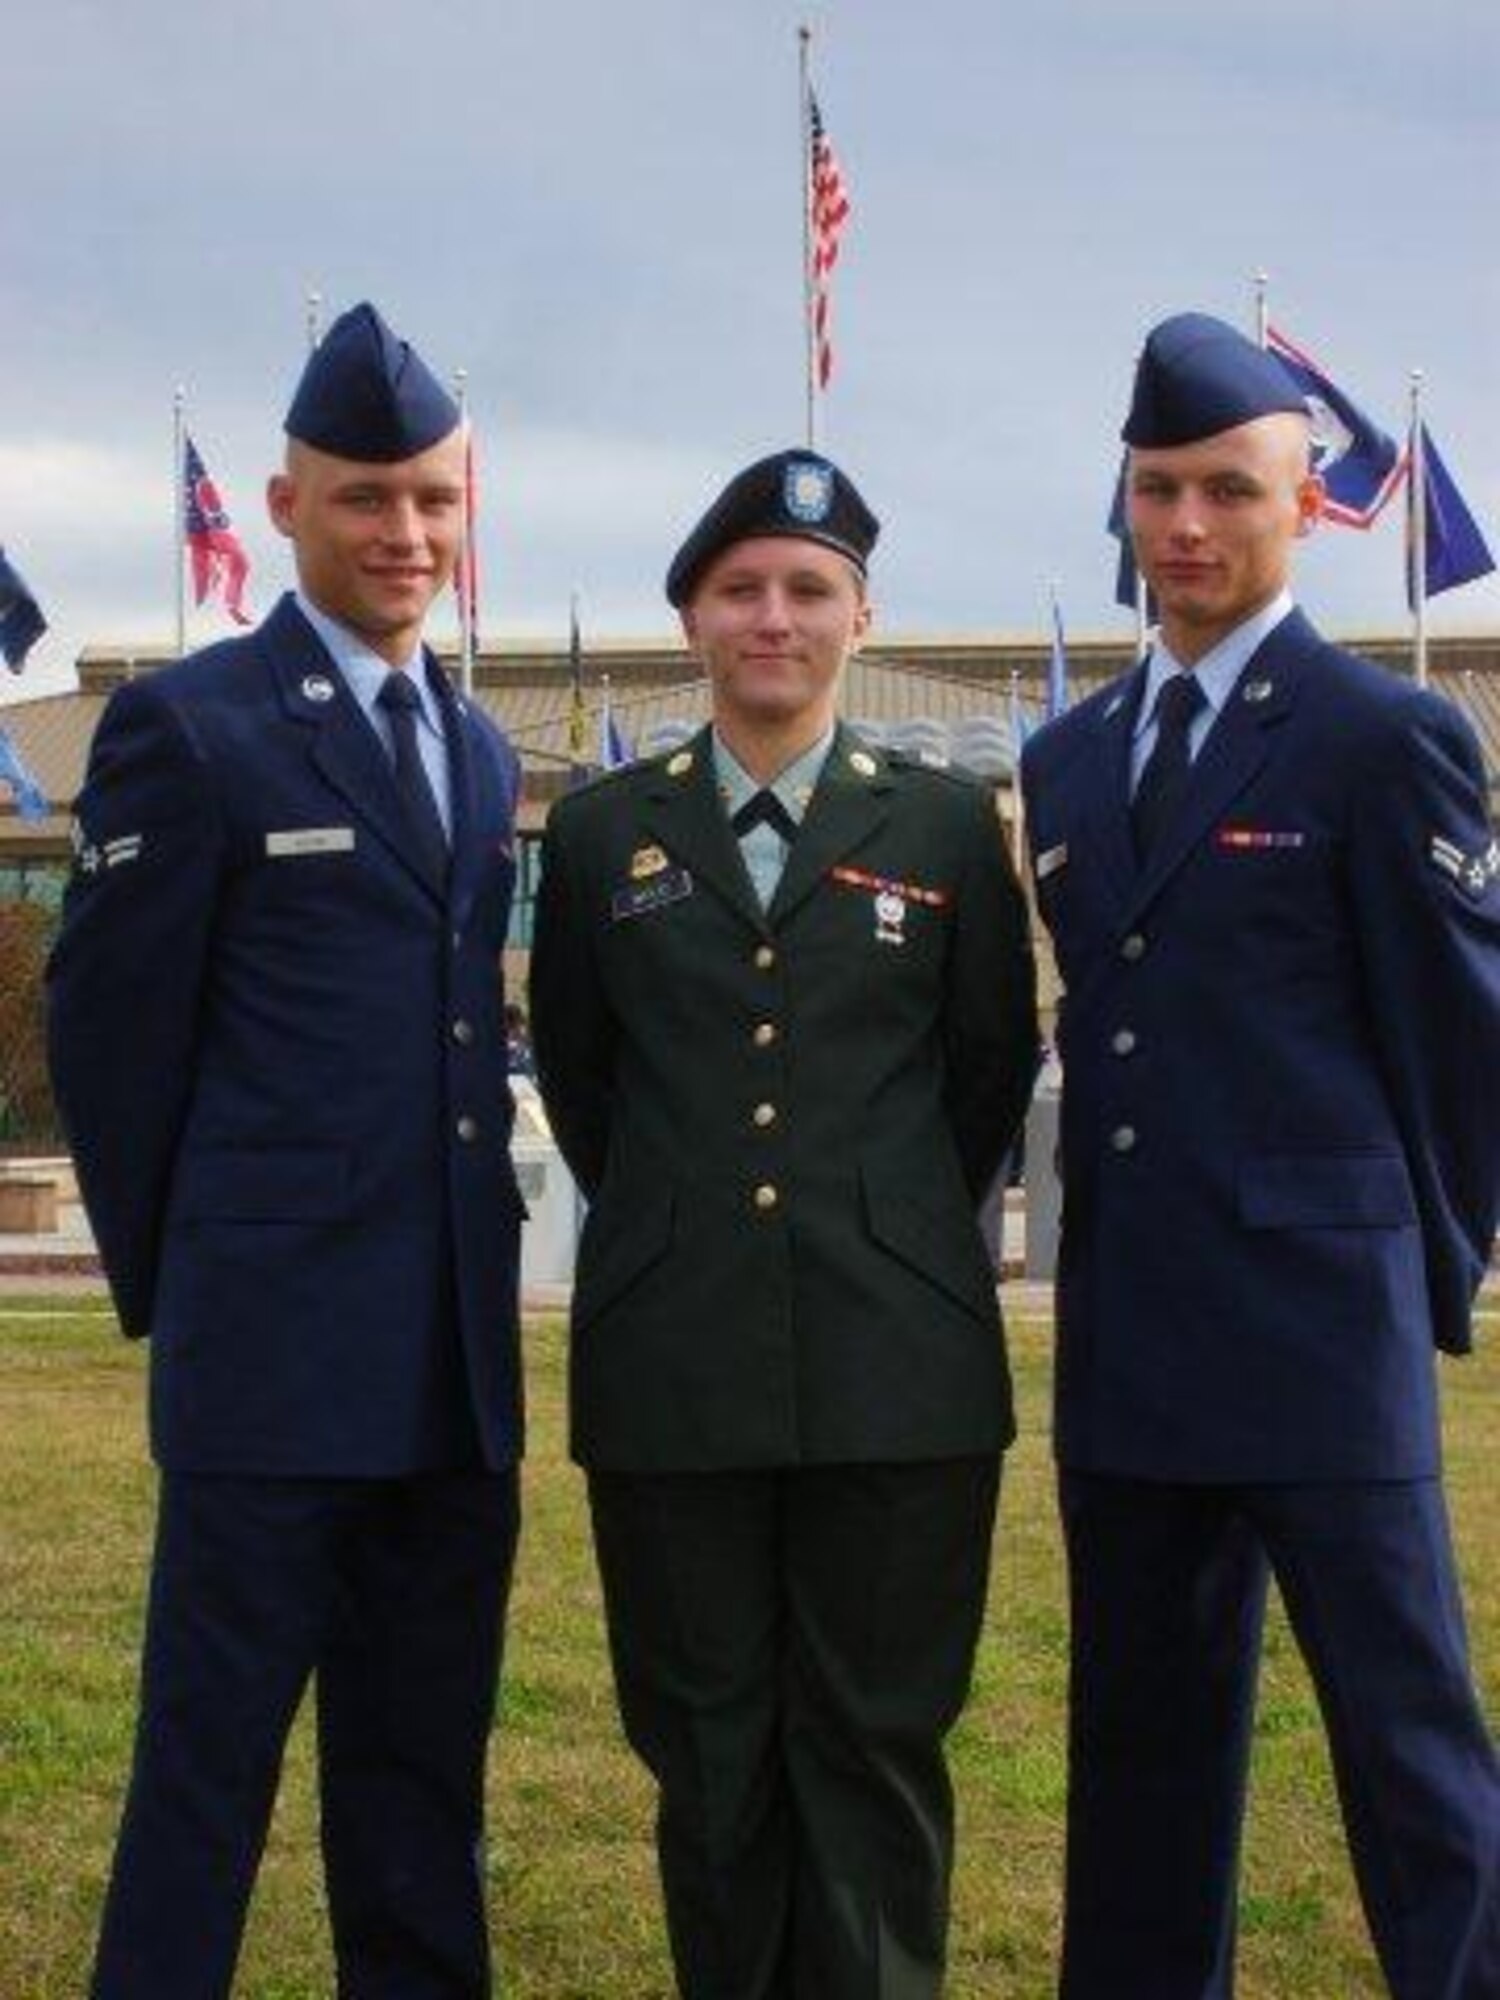 Wood brothers, Sean and Chris pose with their older sister Jessica after graduating from Basic Military Training at Lackland AFB, Texas. Courtesy photo provided by the Wood family.
